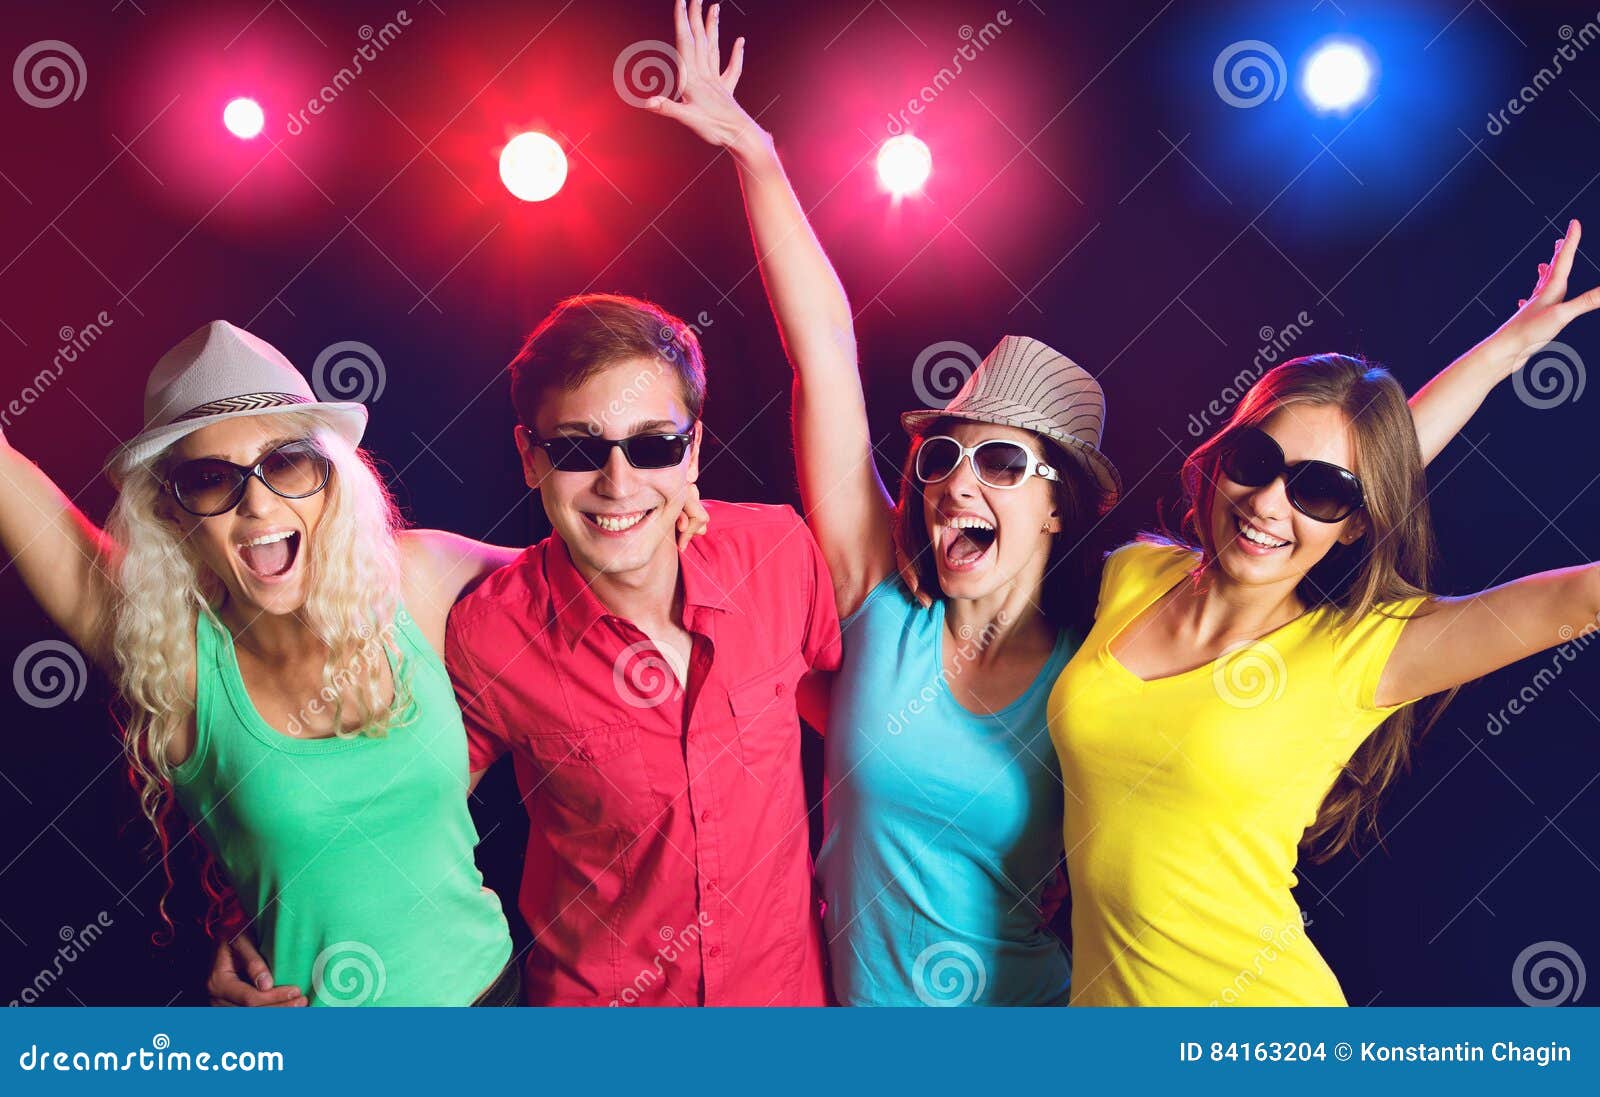 Young people at party. stock photo. Image of expressing - 84163204